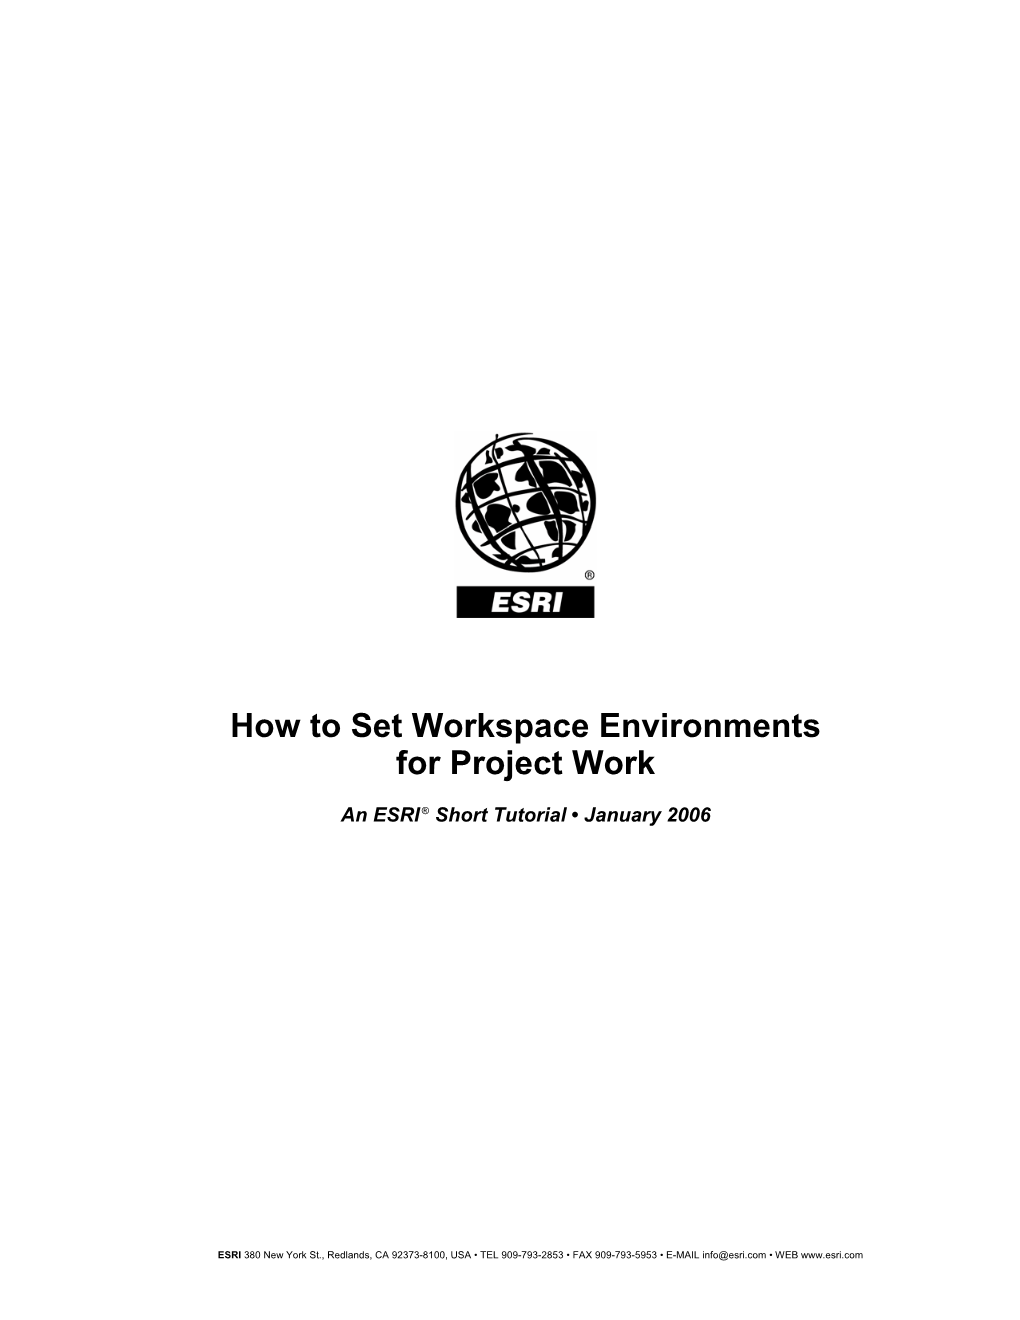 How to Set Workspace Environments for Project Work